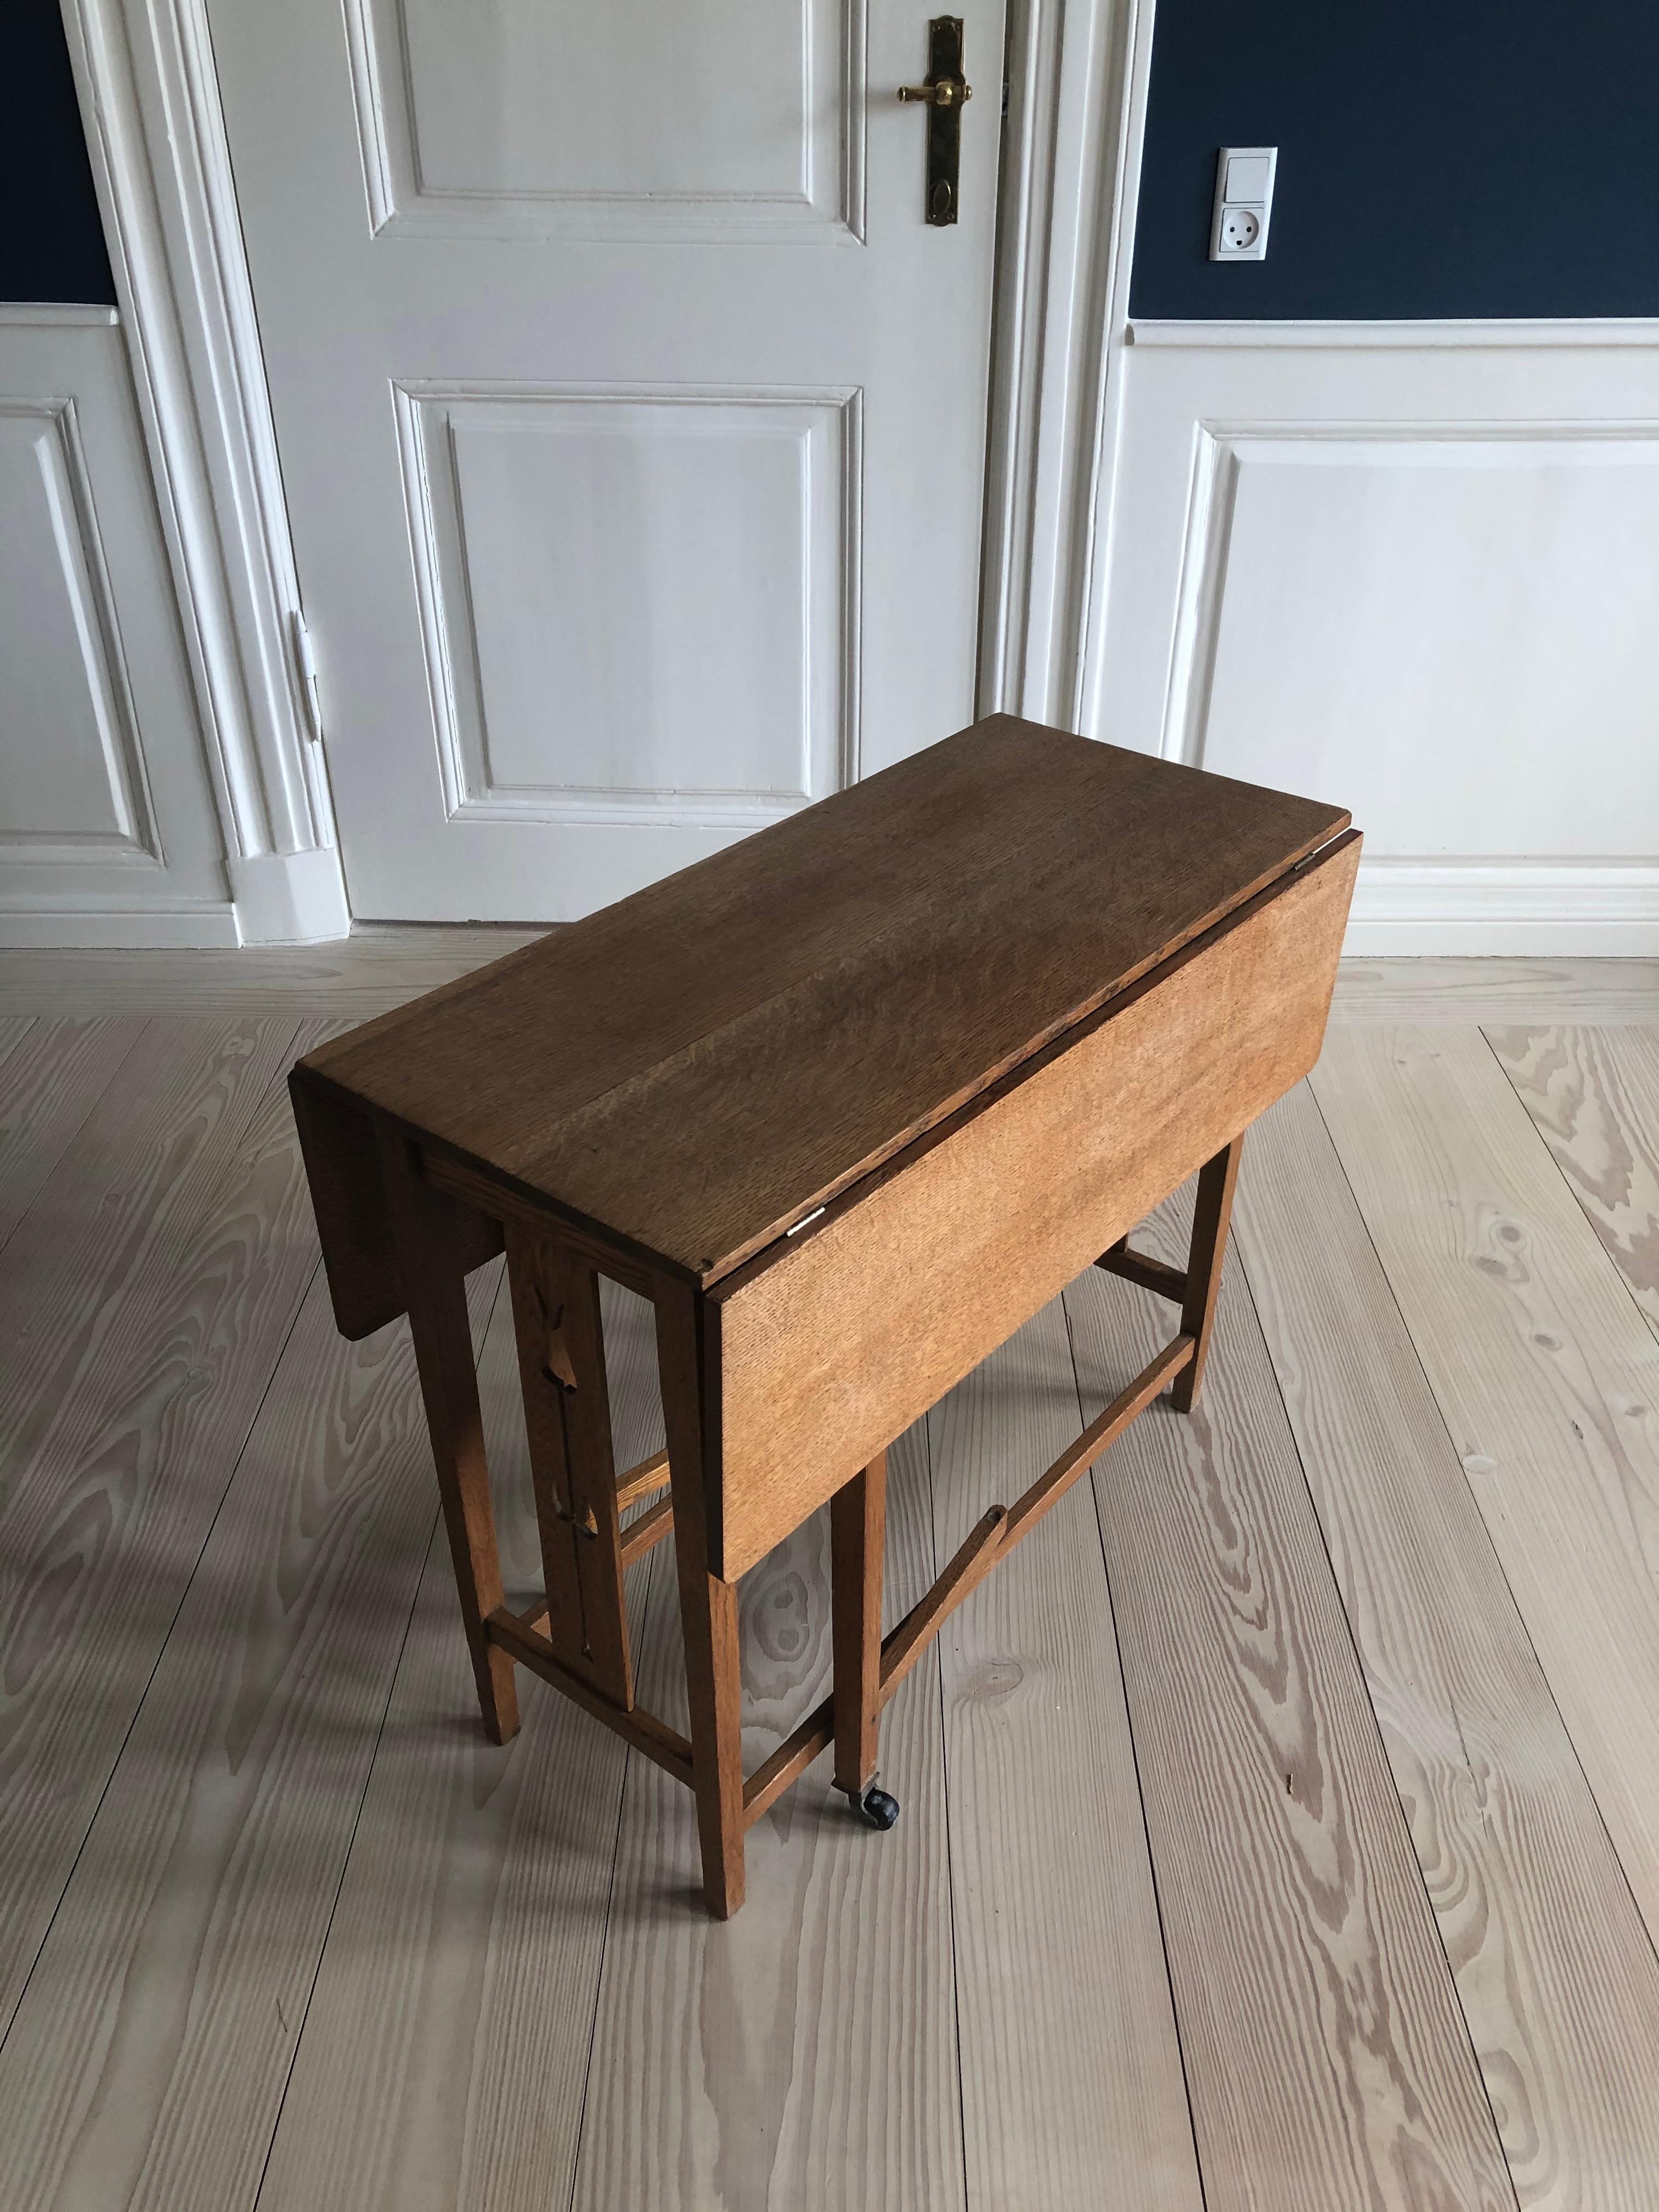 English Vintage Arts & Crafts Drop-Leaf Table in Solid Oak, England, Early 20th Century